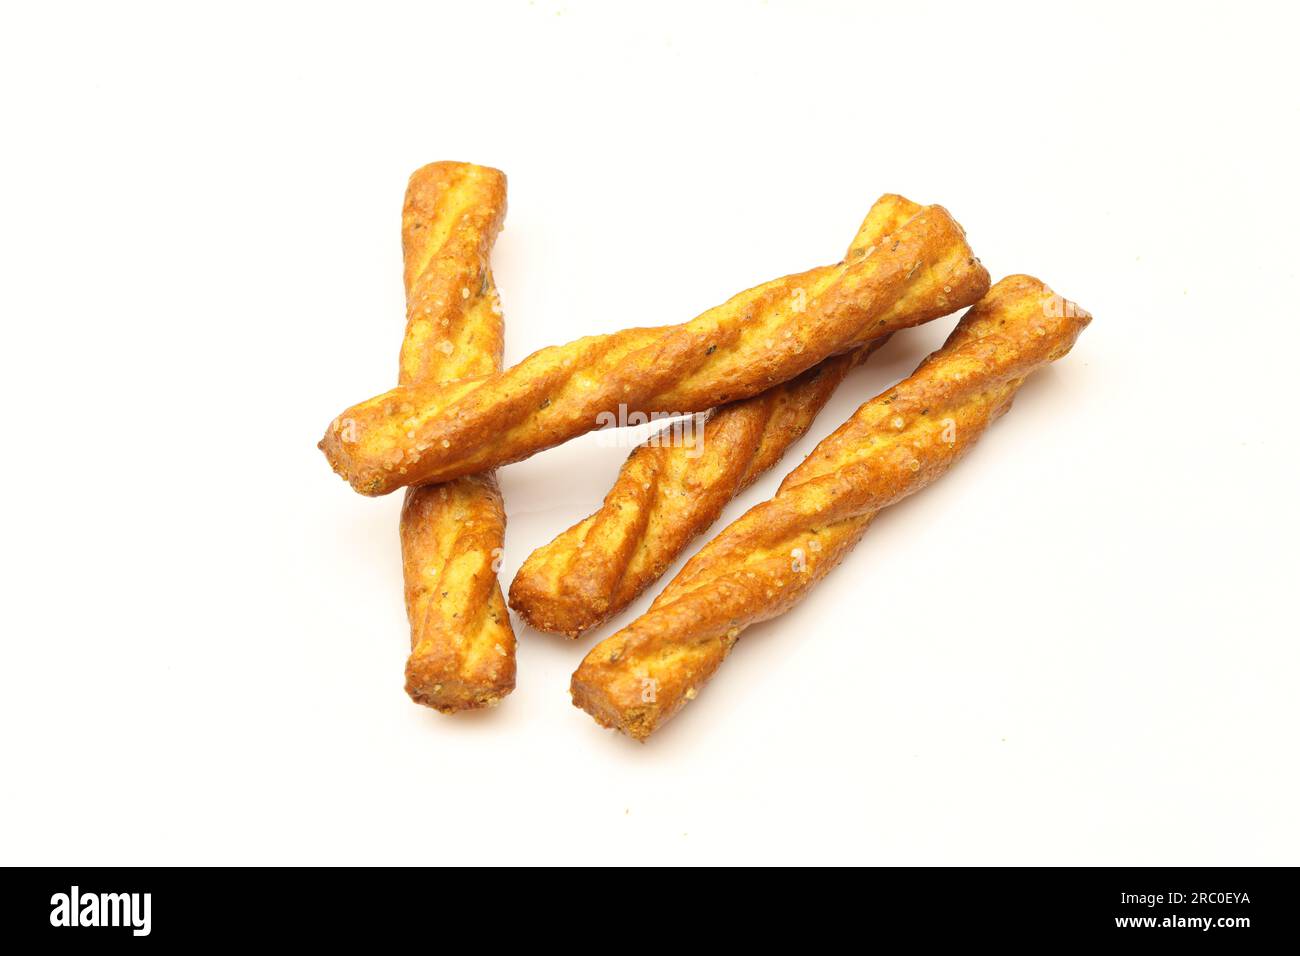 Few salty and  twisted pretzel sticks isolated on white background. Italian snack Stock Photo